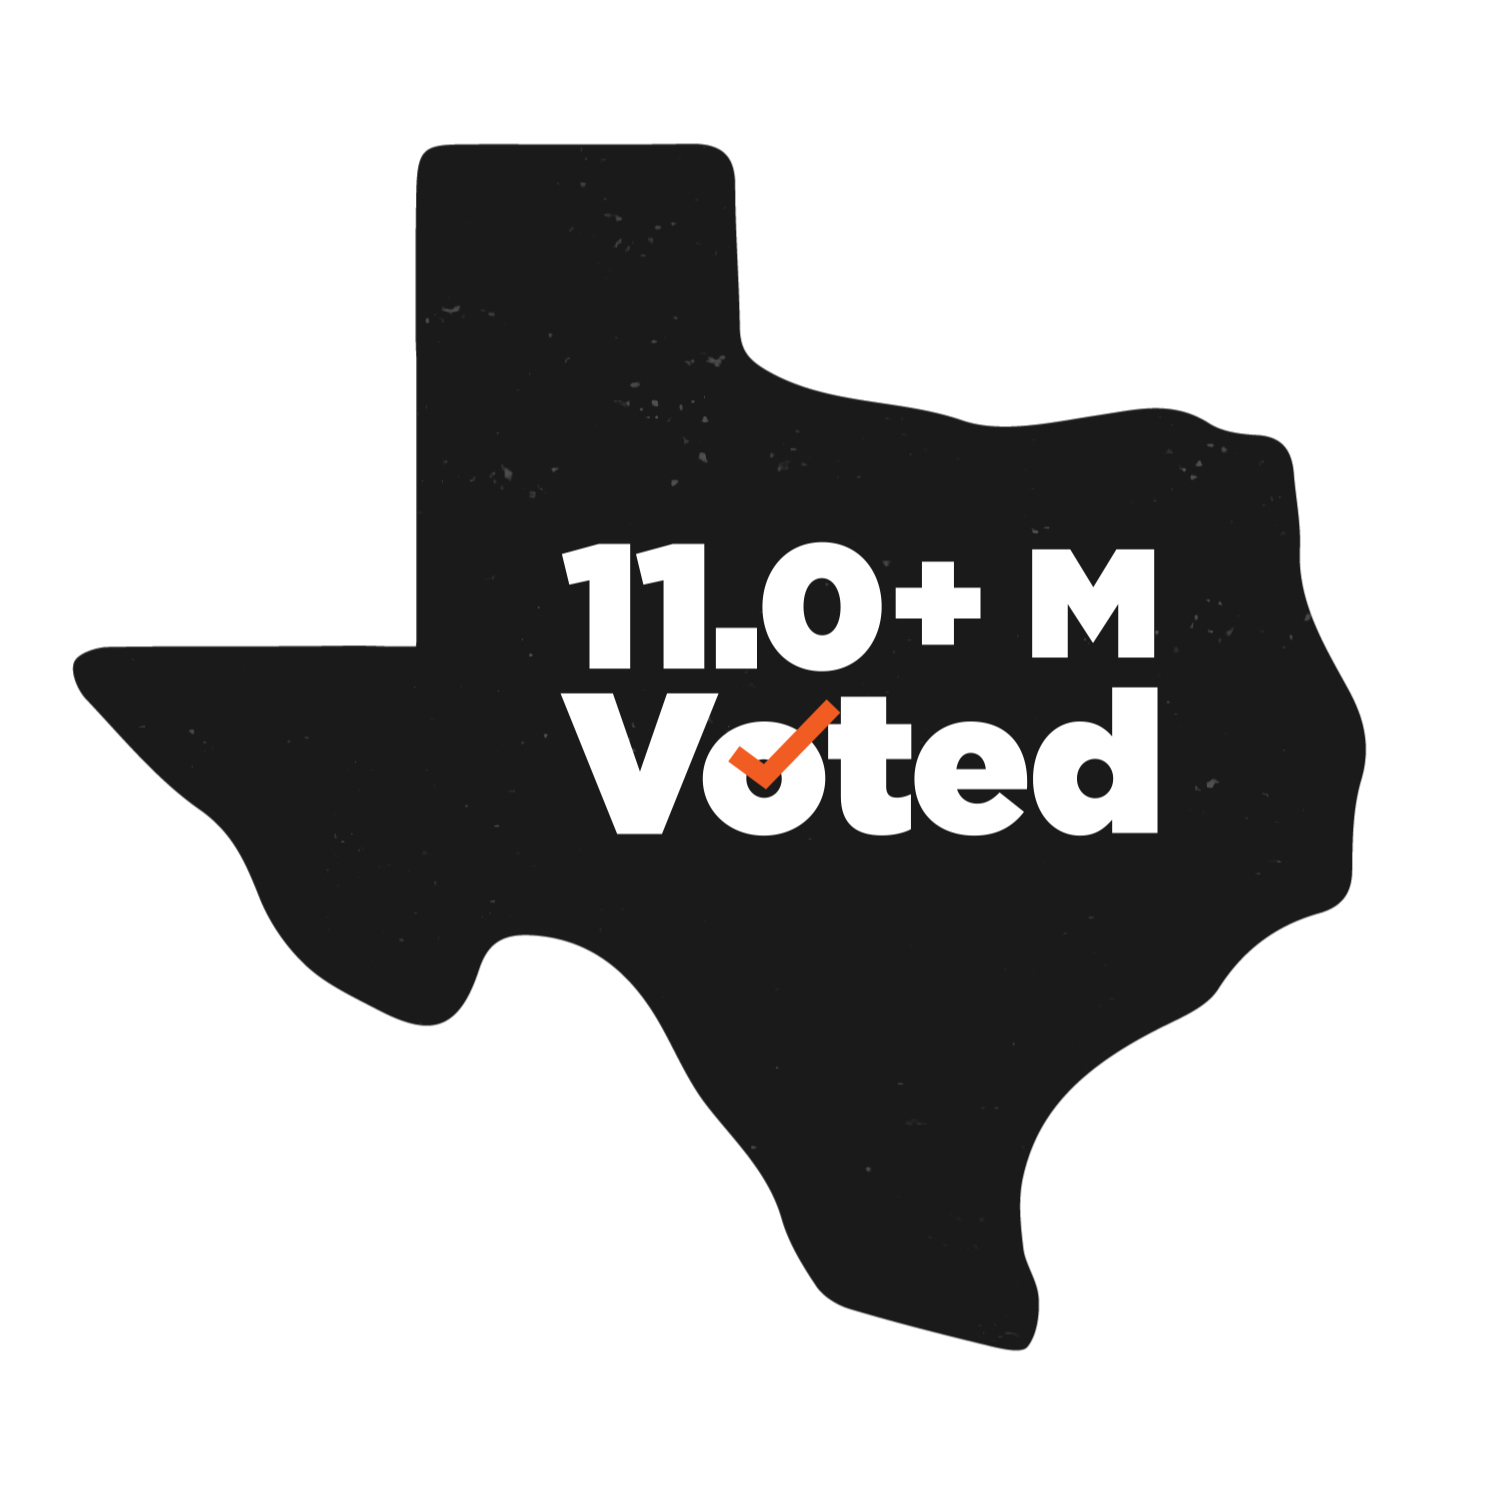 Post election Texas state - more than 11 million voted